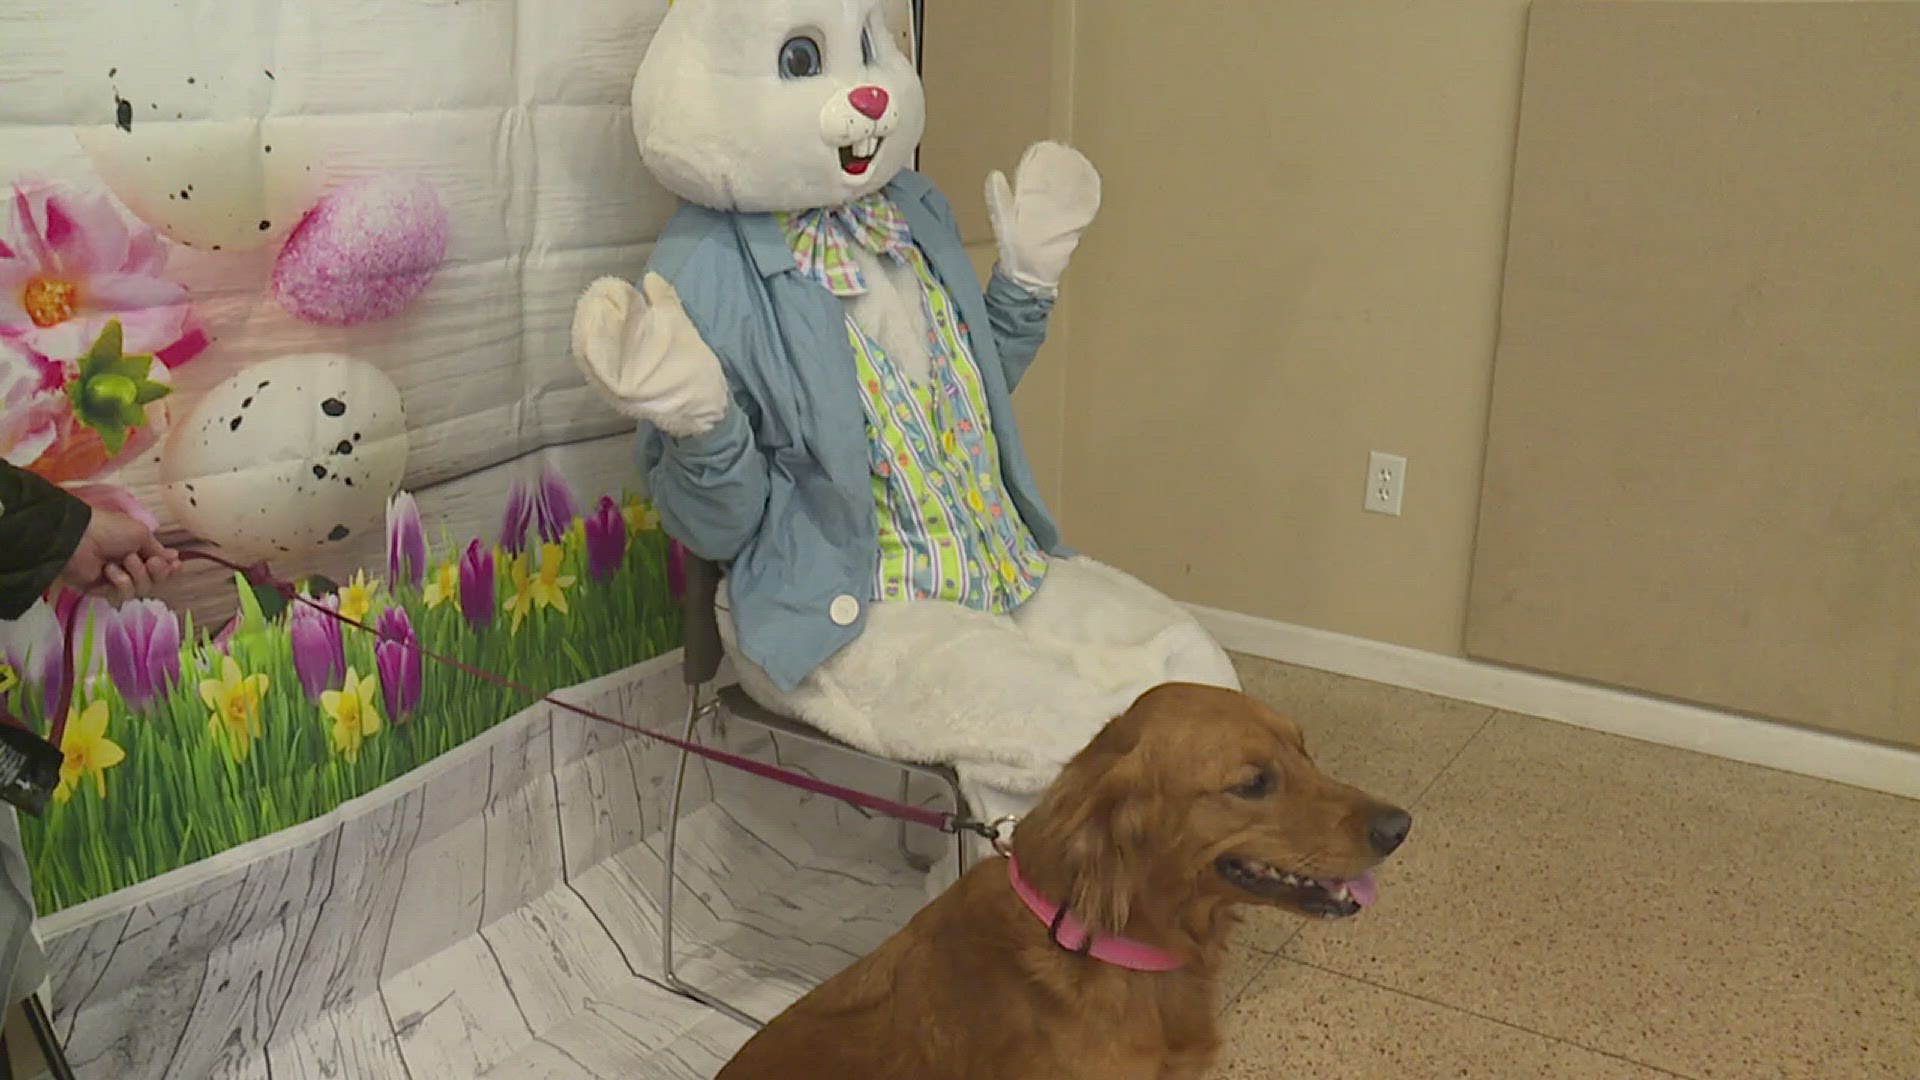 Moline Parks and Rec has been handing out goodie bags to dogs and their owners getting pictures with the Easter Bunny in a continued post-pandemic tradition.